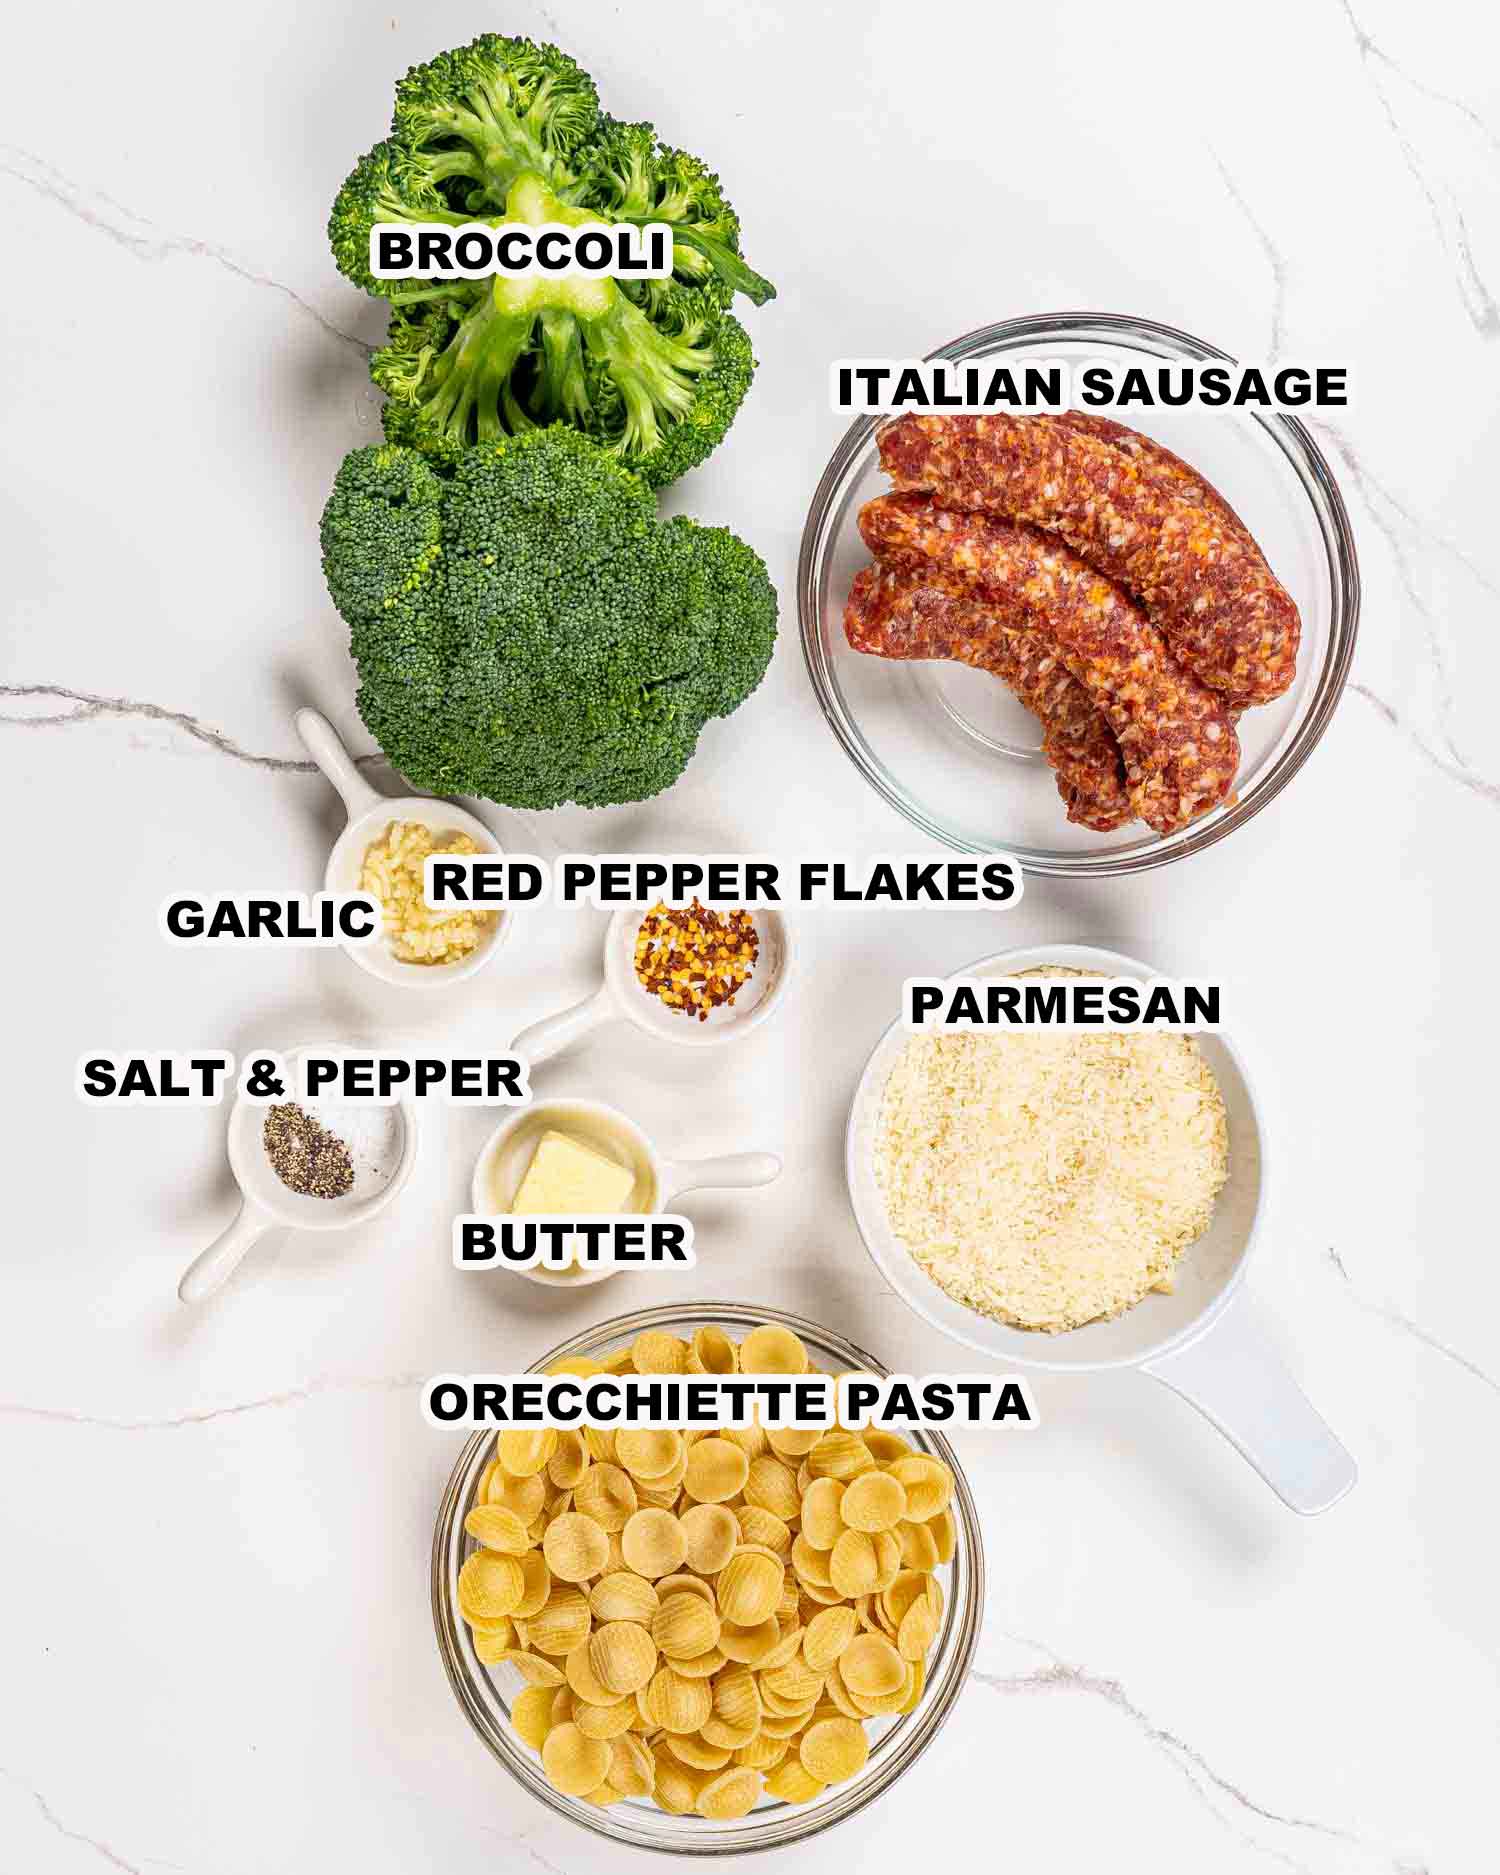 ingredients needed to make orecchiette with sausage and broccoli.